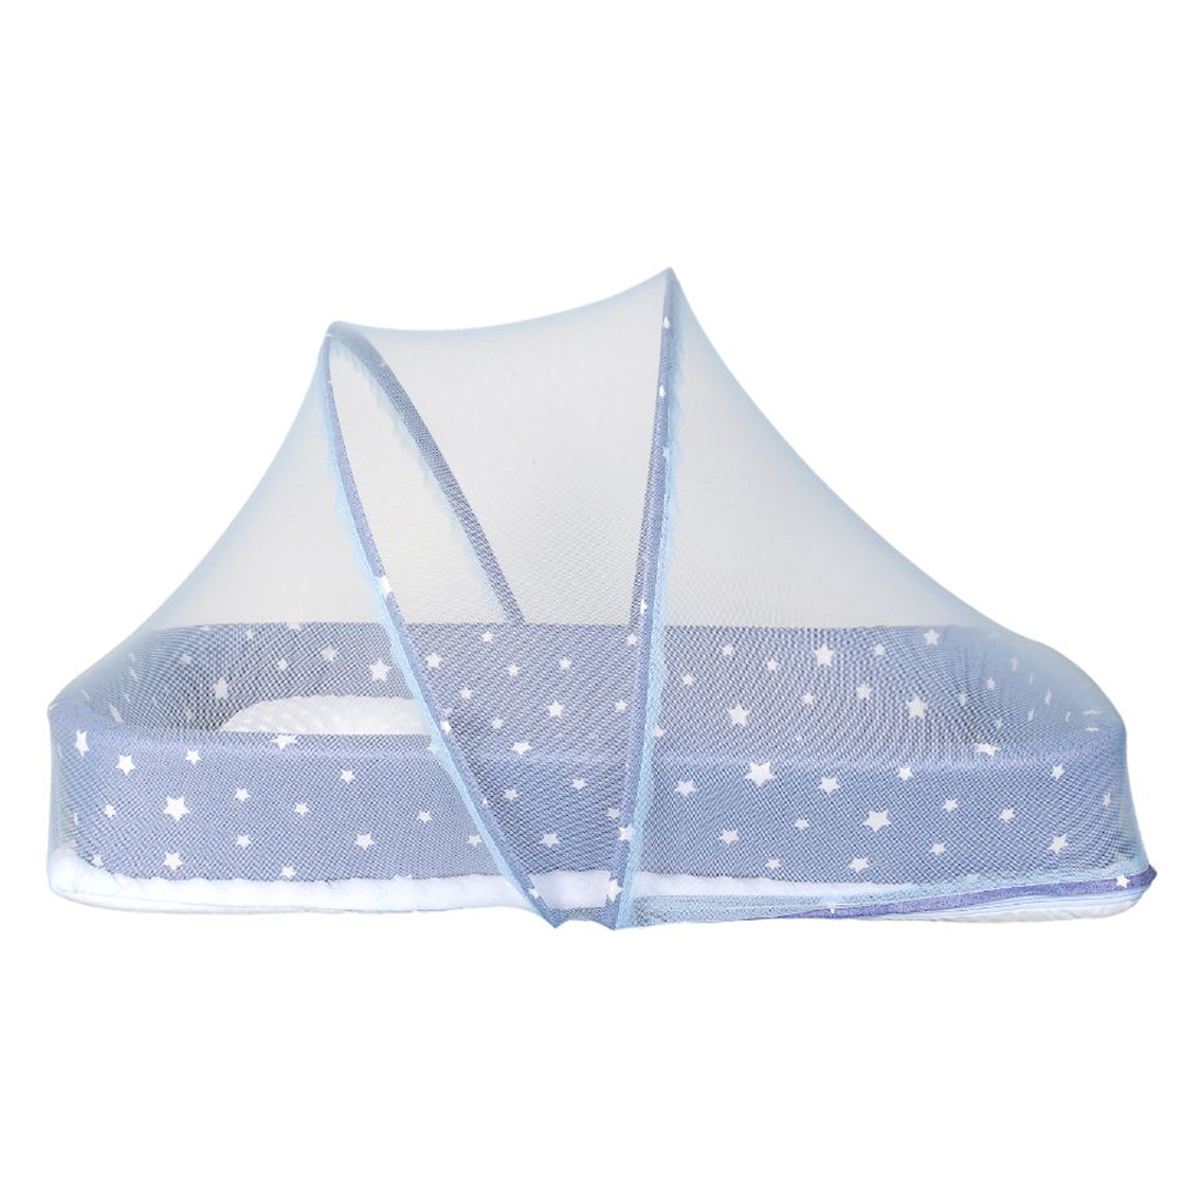 Little Angel - Baby Bed w/Comfy Paddings - Blue